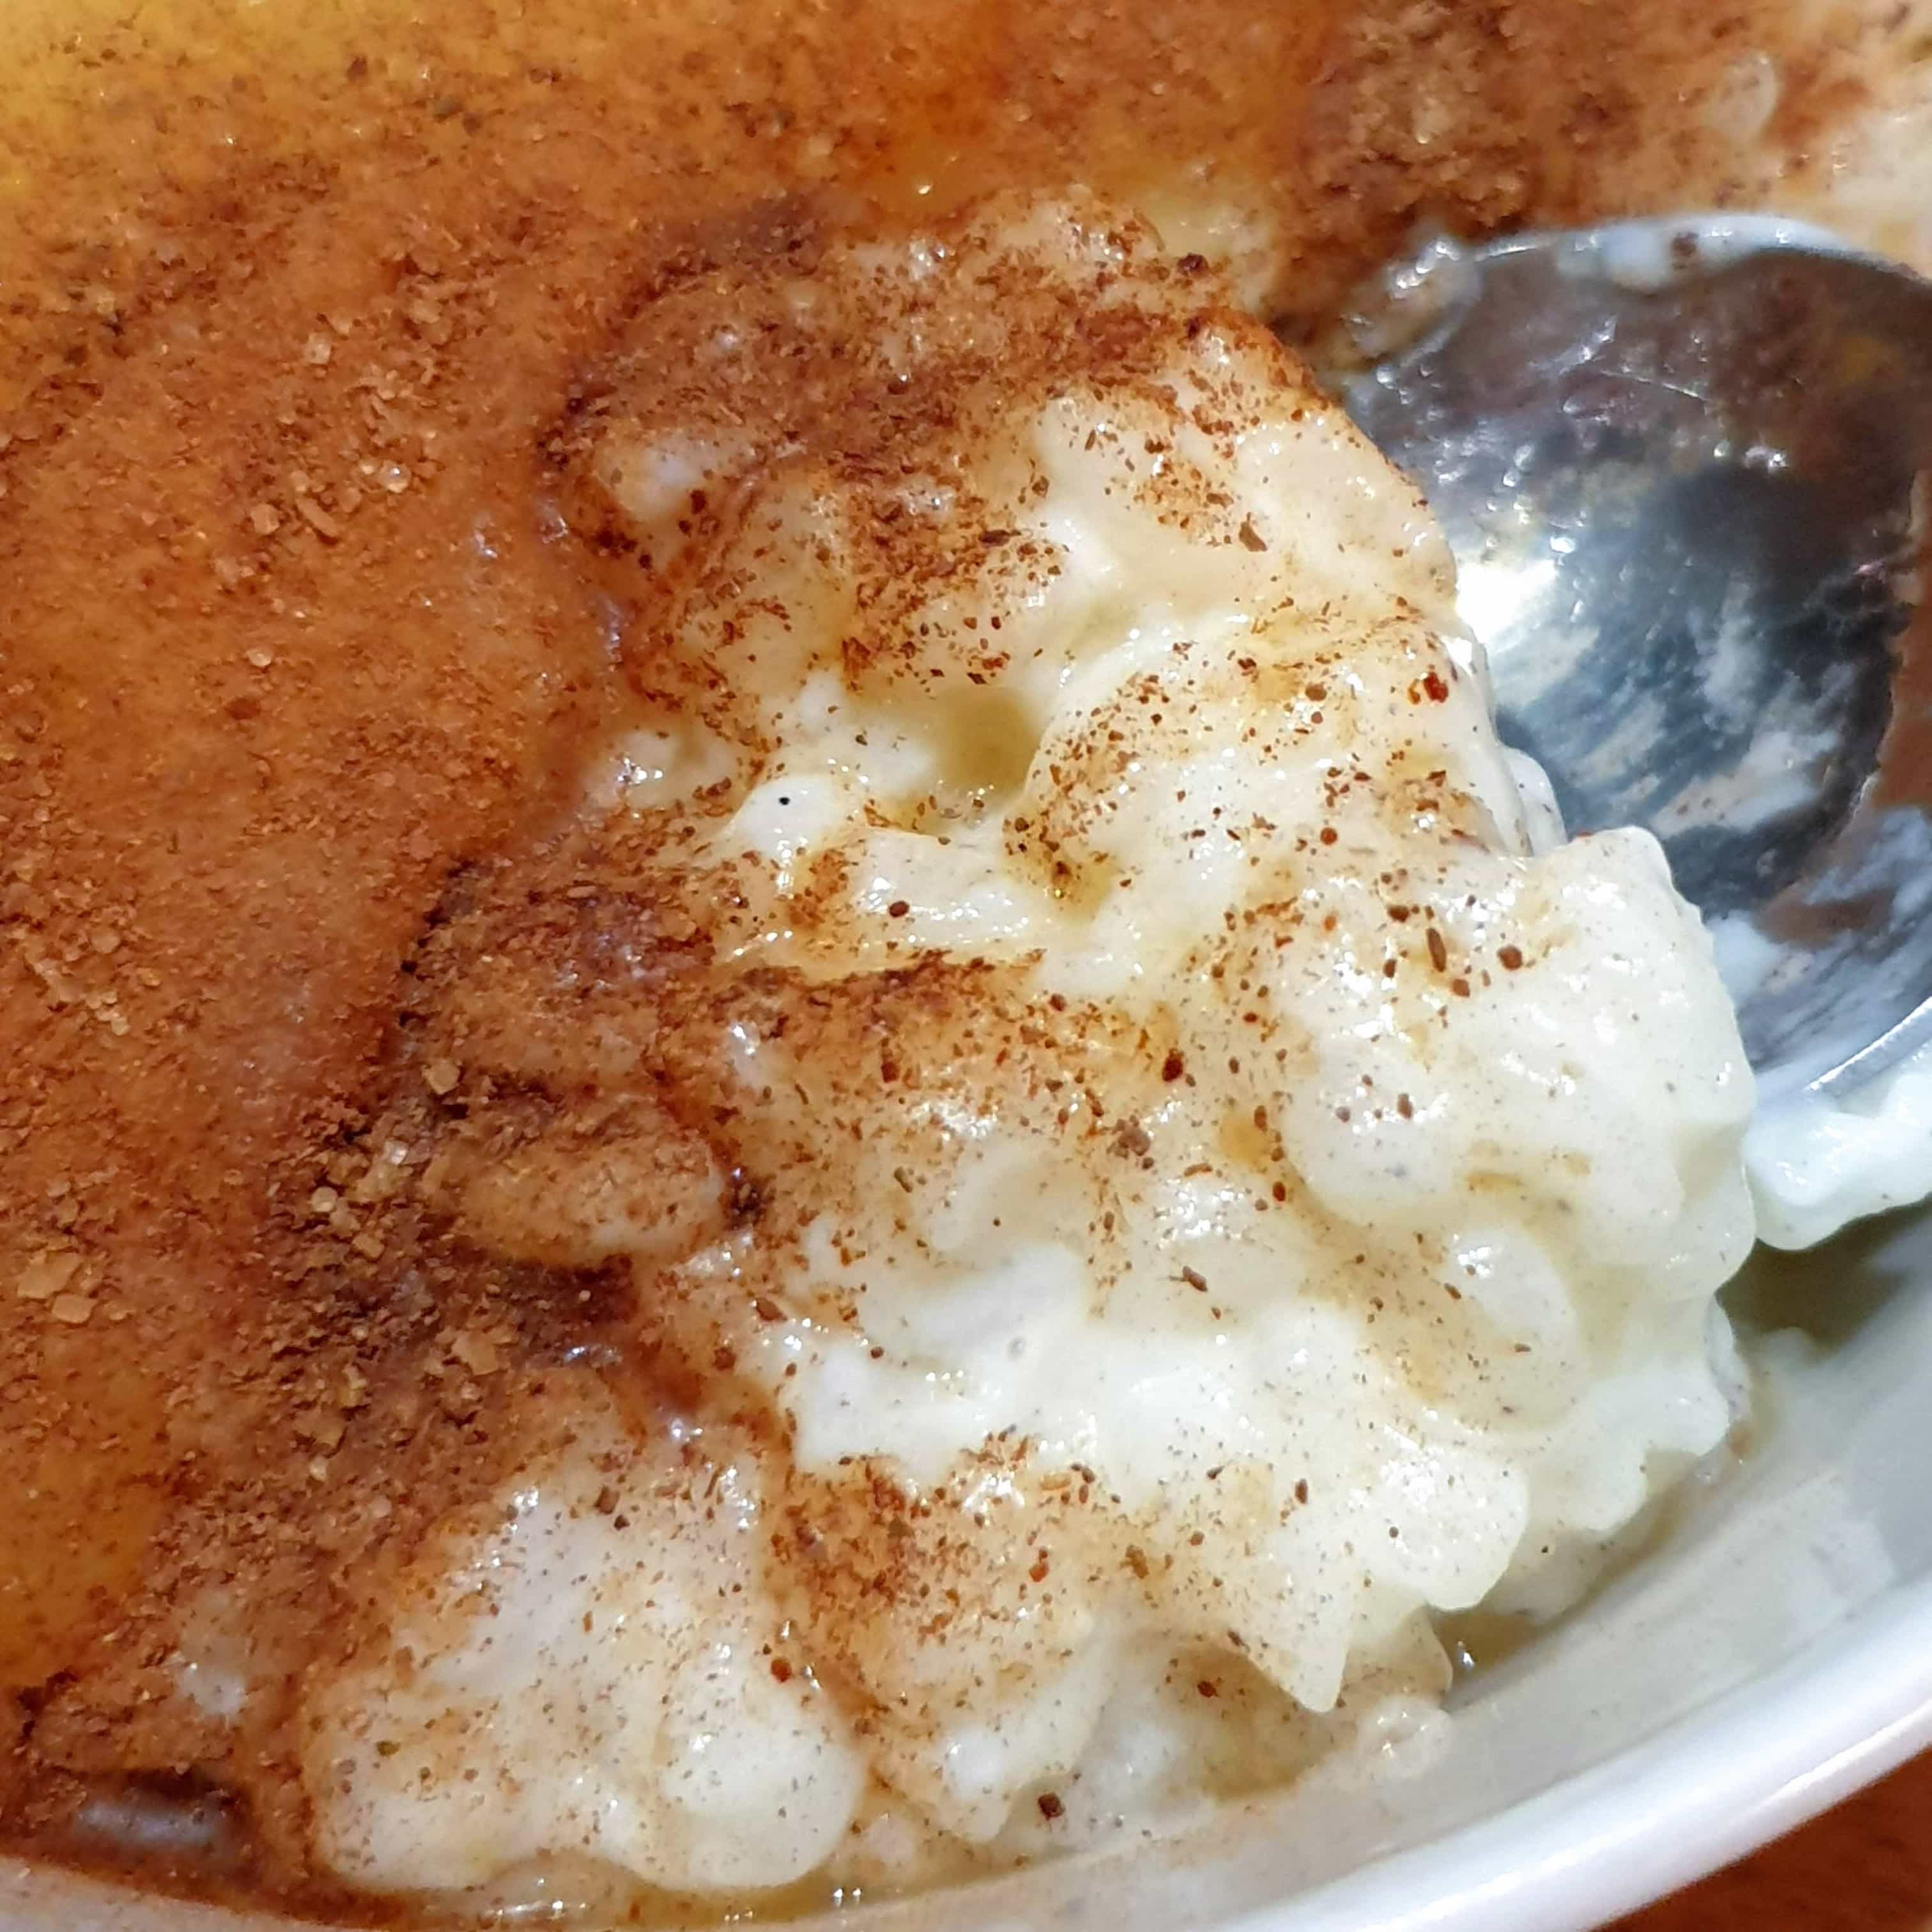 Rice porridge - how to make Danish rice porridge easily in the microwave. Make a delicious rice porridge, eat it for breakfast or dinner, or use it in rice puddings or rice pancakes. Find recipes, free print, and inspiration @ danishthings.com